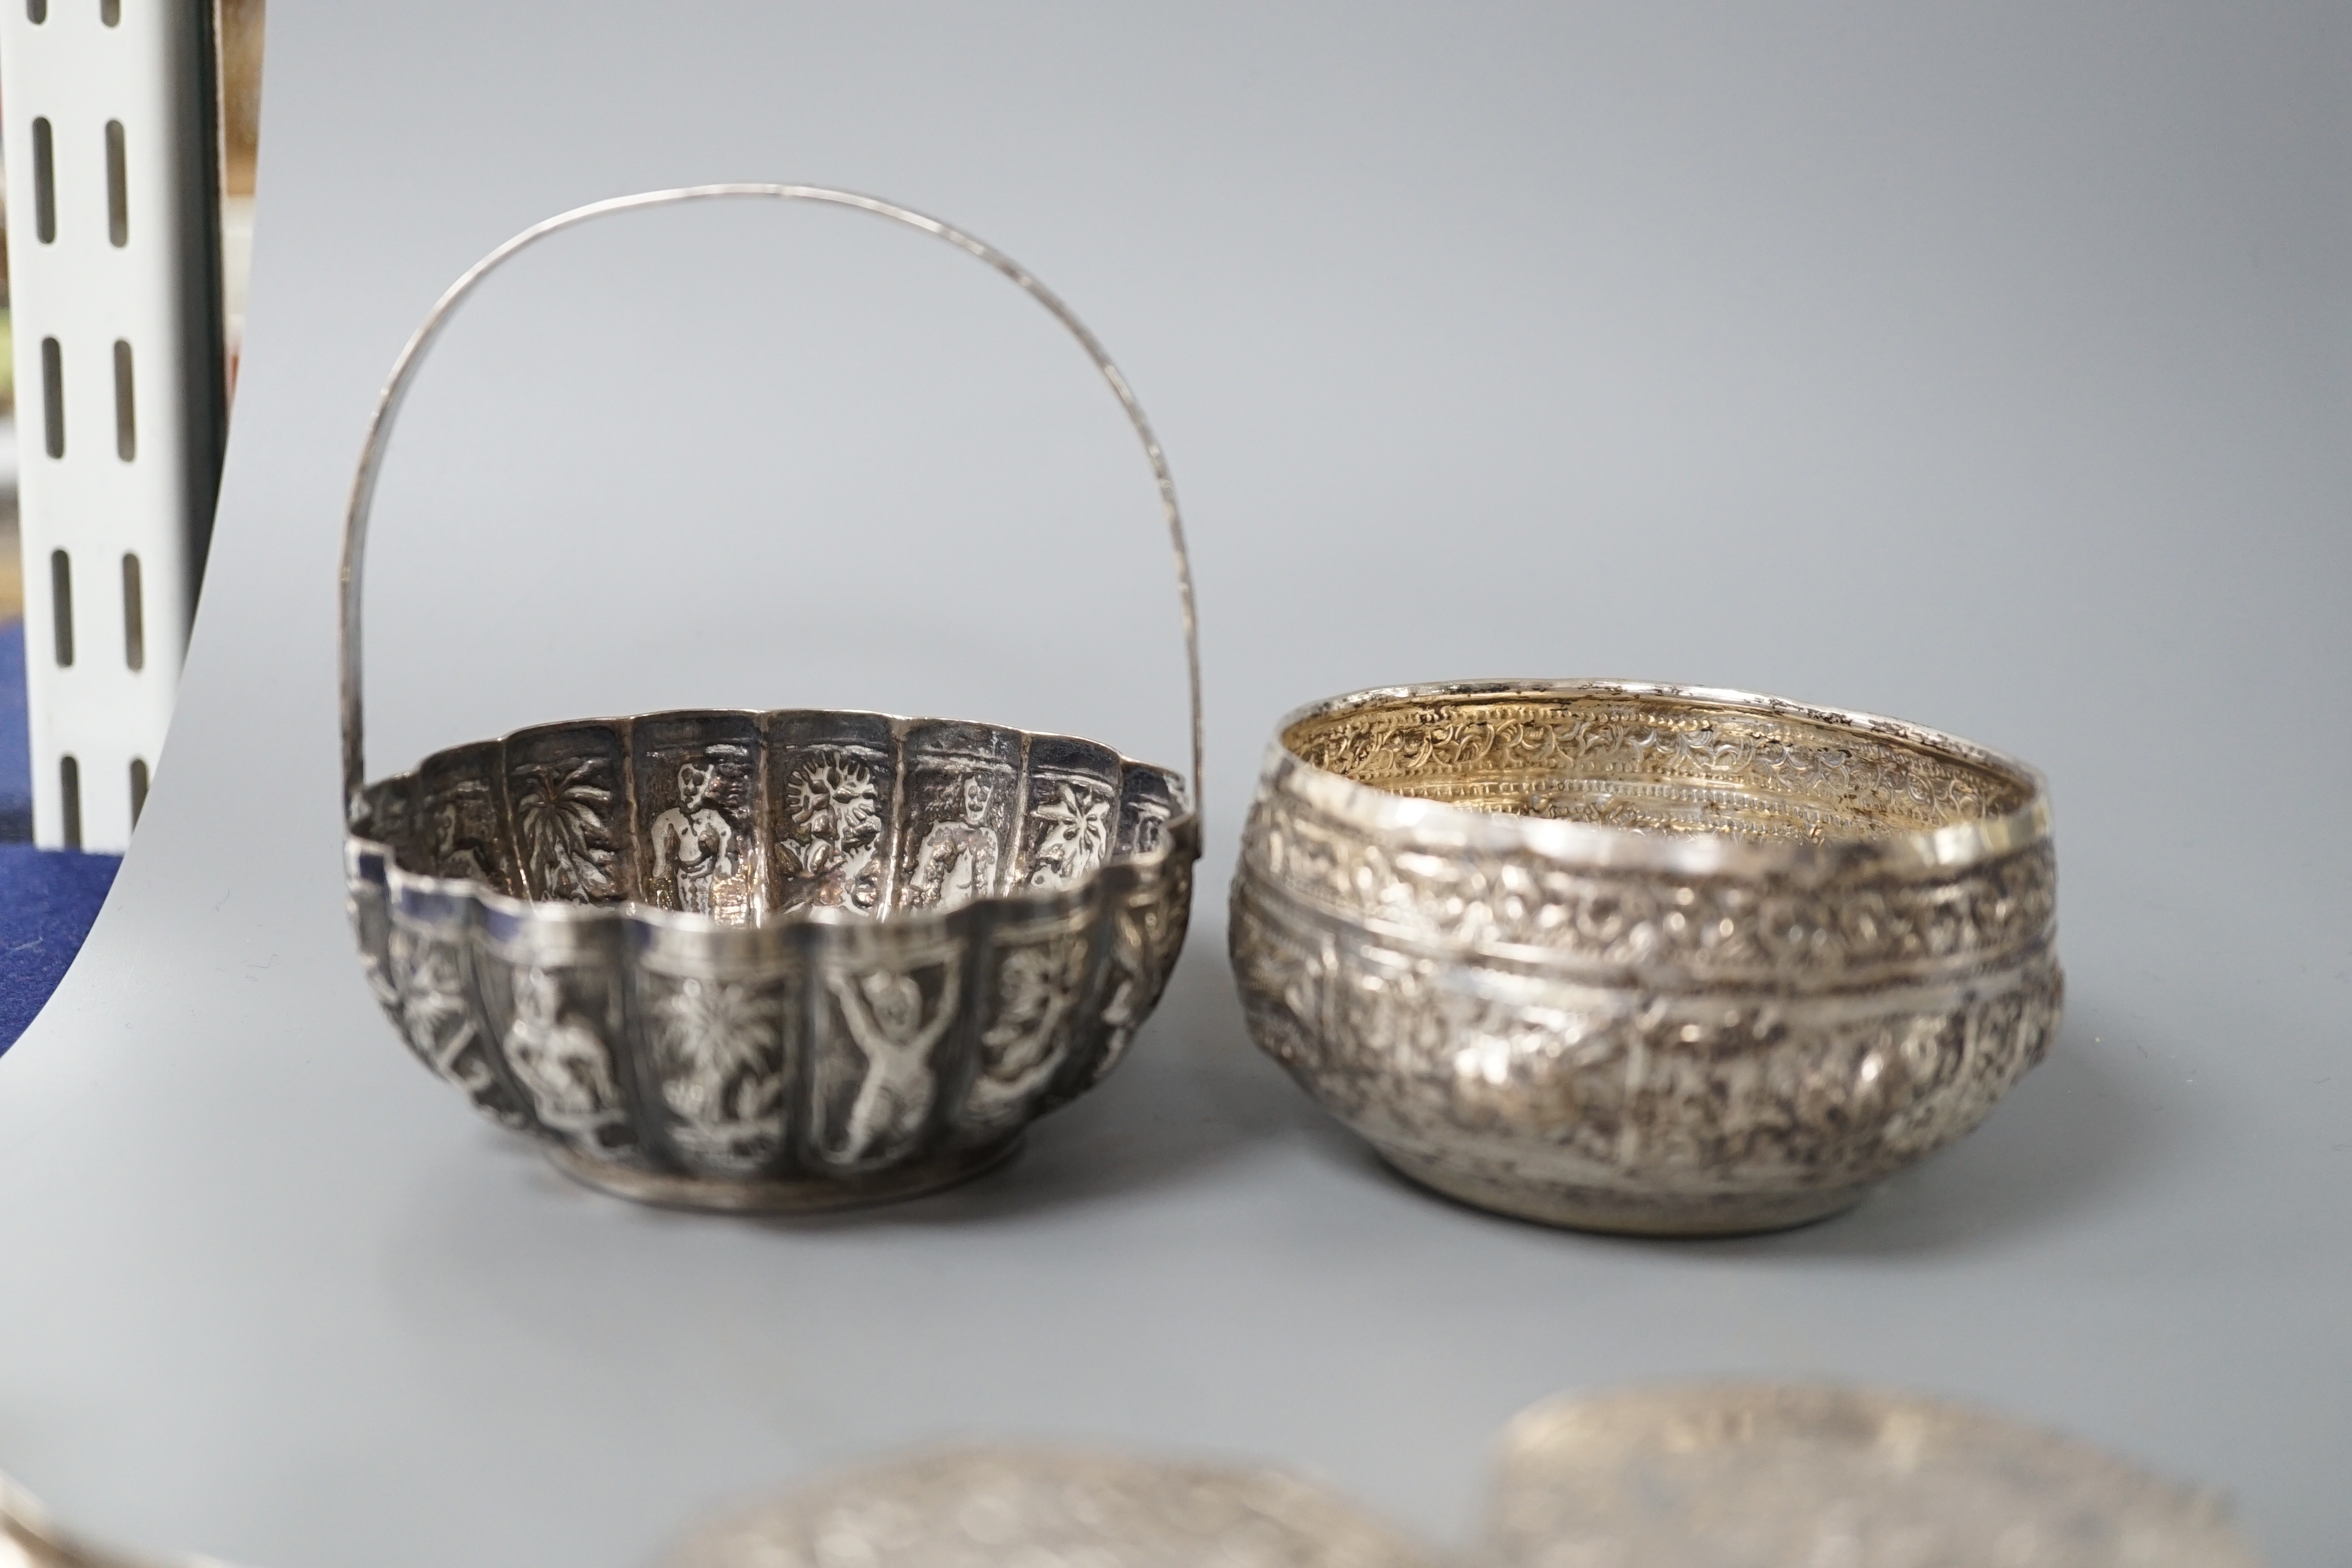 A Burmese? white metal bonbon basket, height 10.1cm and a similar bowl, two Persian white metal boxes and a spoon.